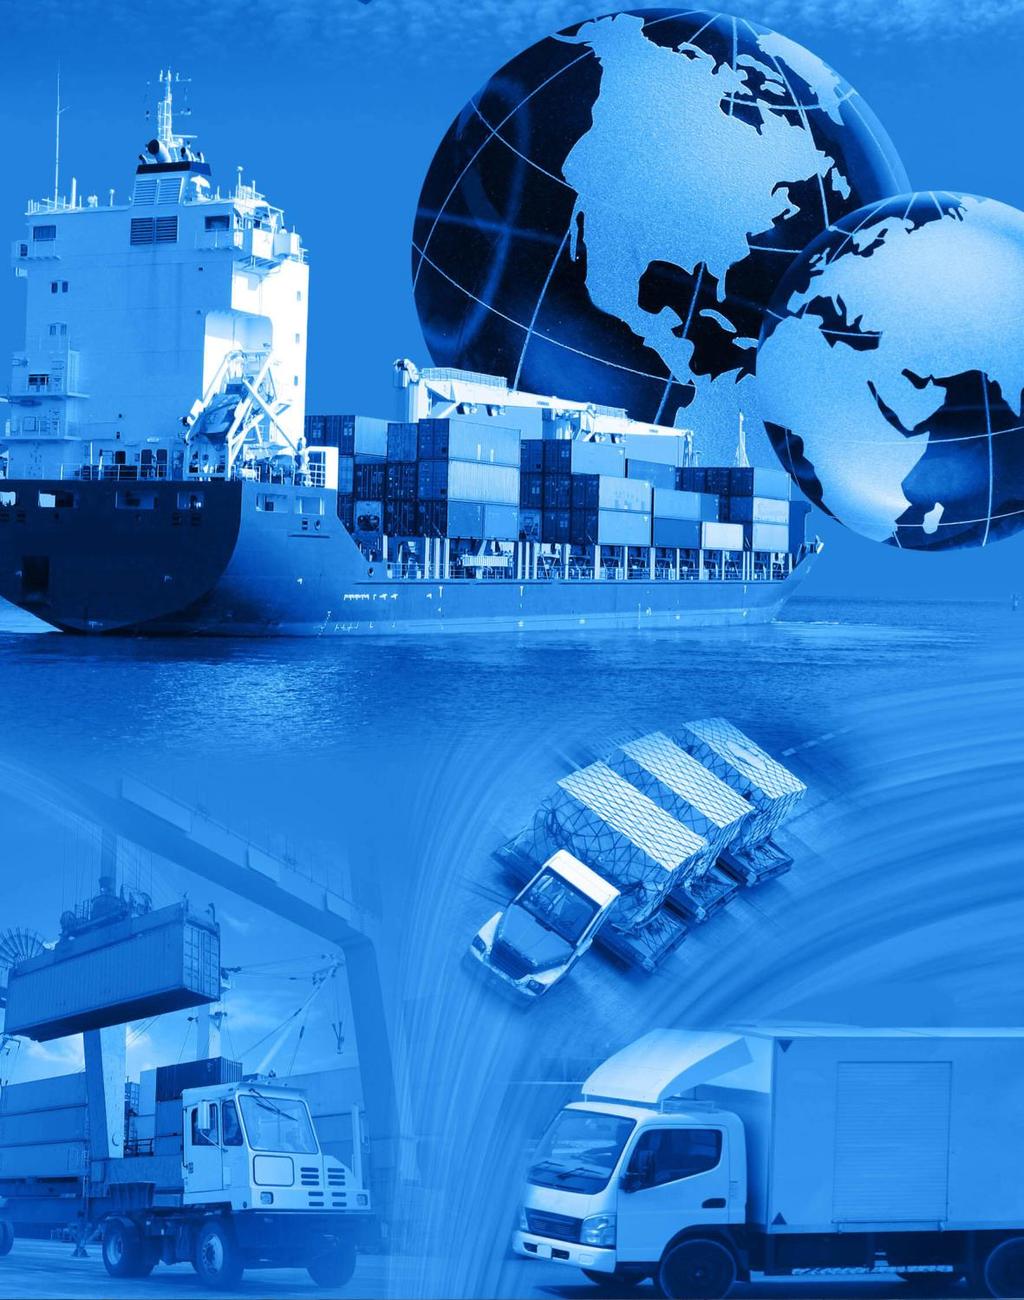 NOATUM LOGISTICS - ACTIVITIES 21 SUPPLY CHAIN MANAGEMENT Logistics consultancy service, analysis and design of the supply chain providing value for our clients.